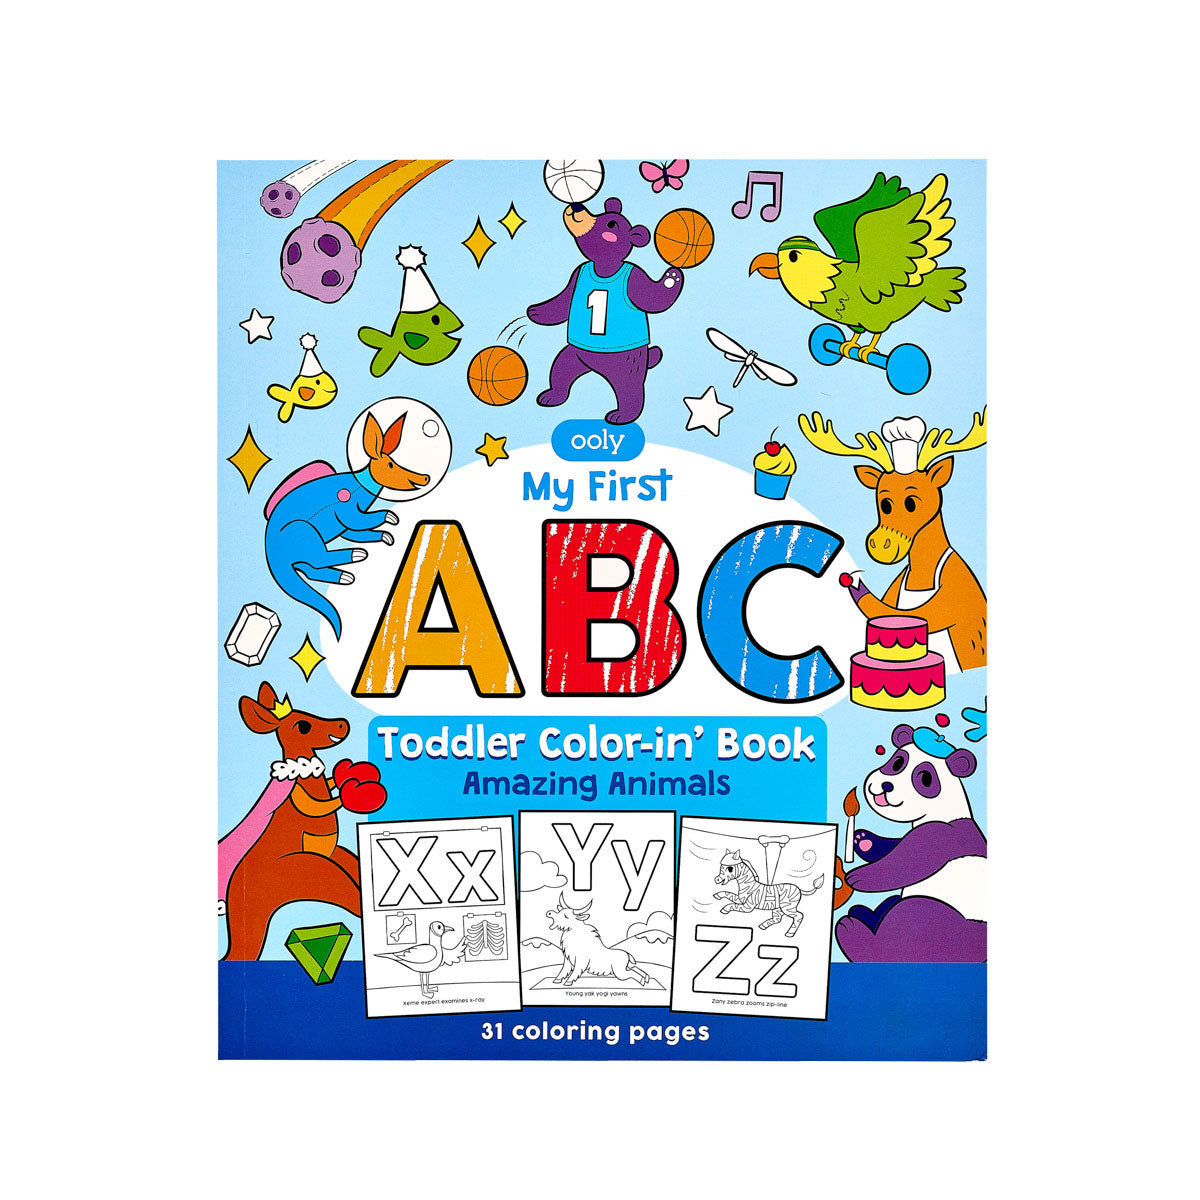 ooly Toddler My First Color-in’ Book ABC Amazing Animals